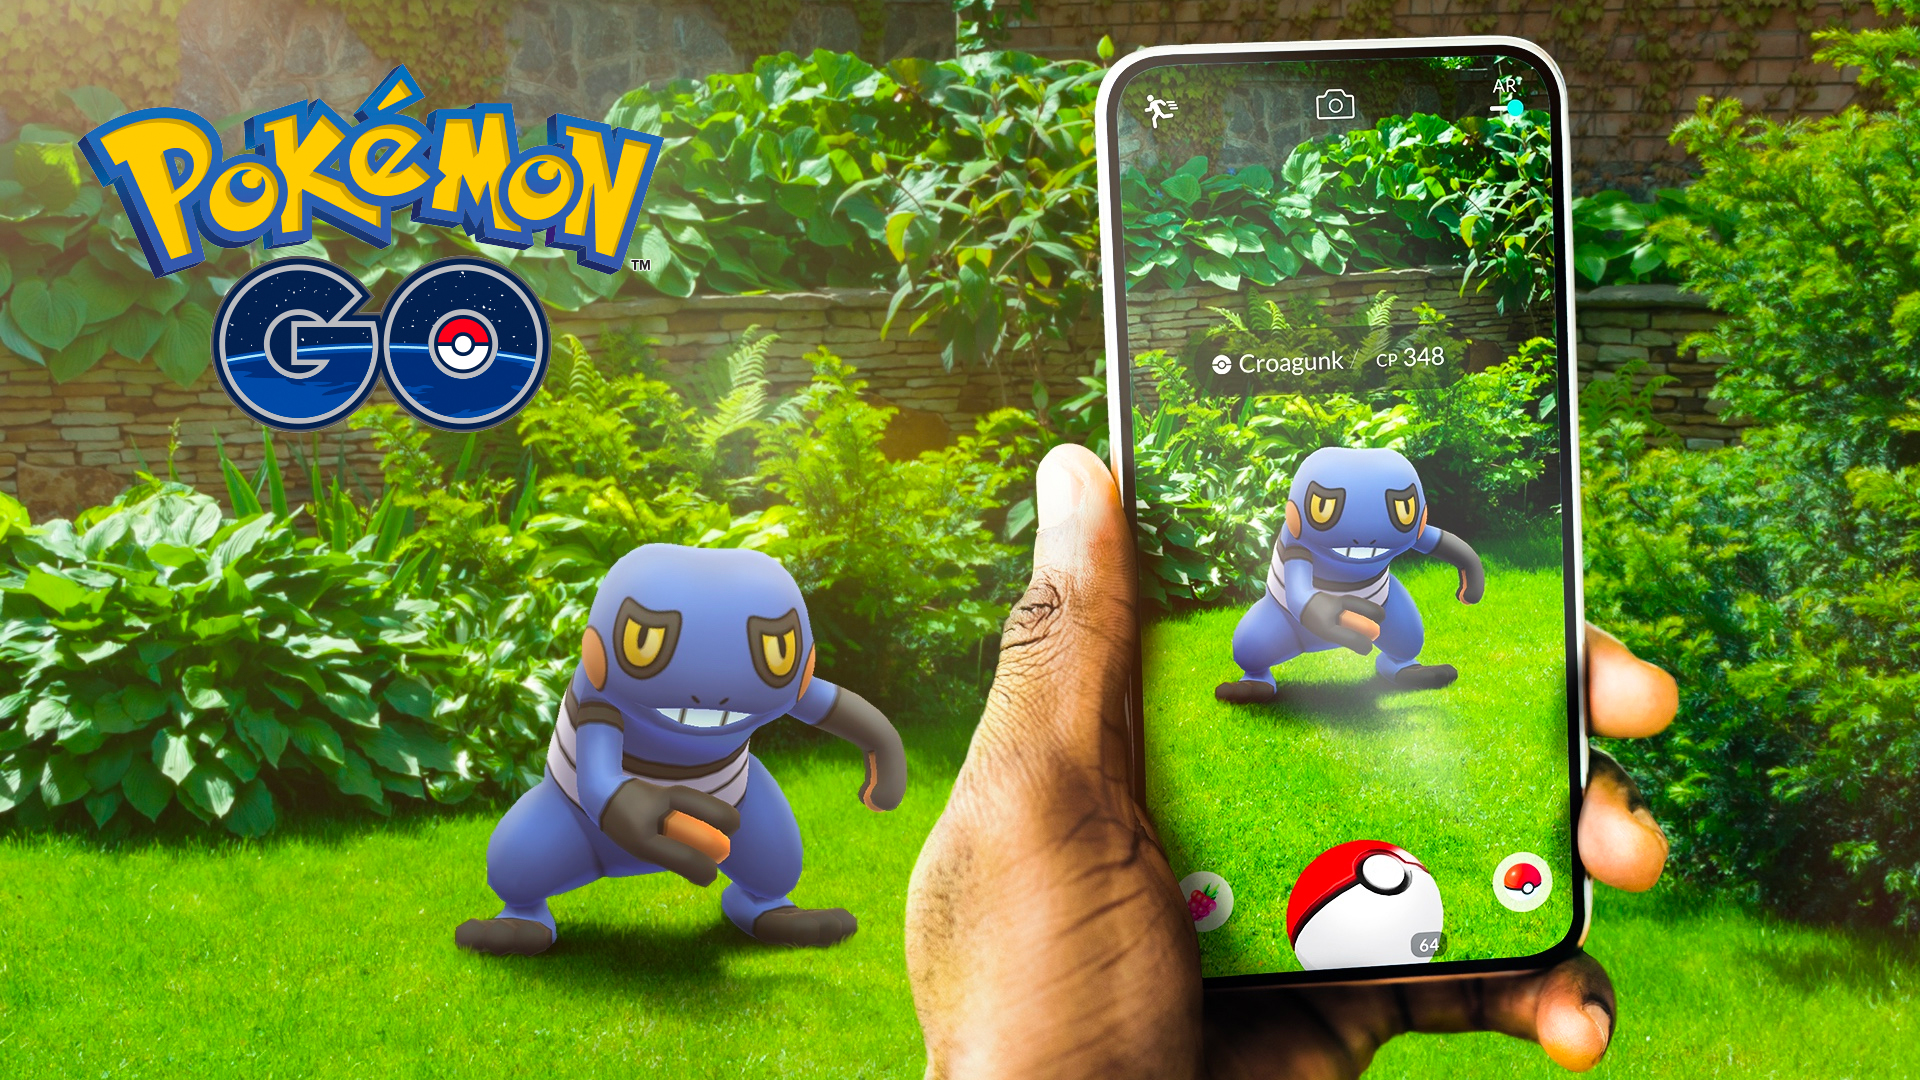 Press article for the augmented reality game Pokemon Go, showing Pokemon in the real world